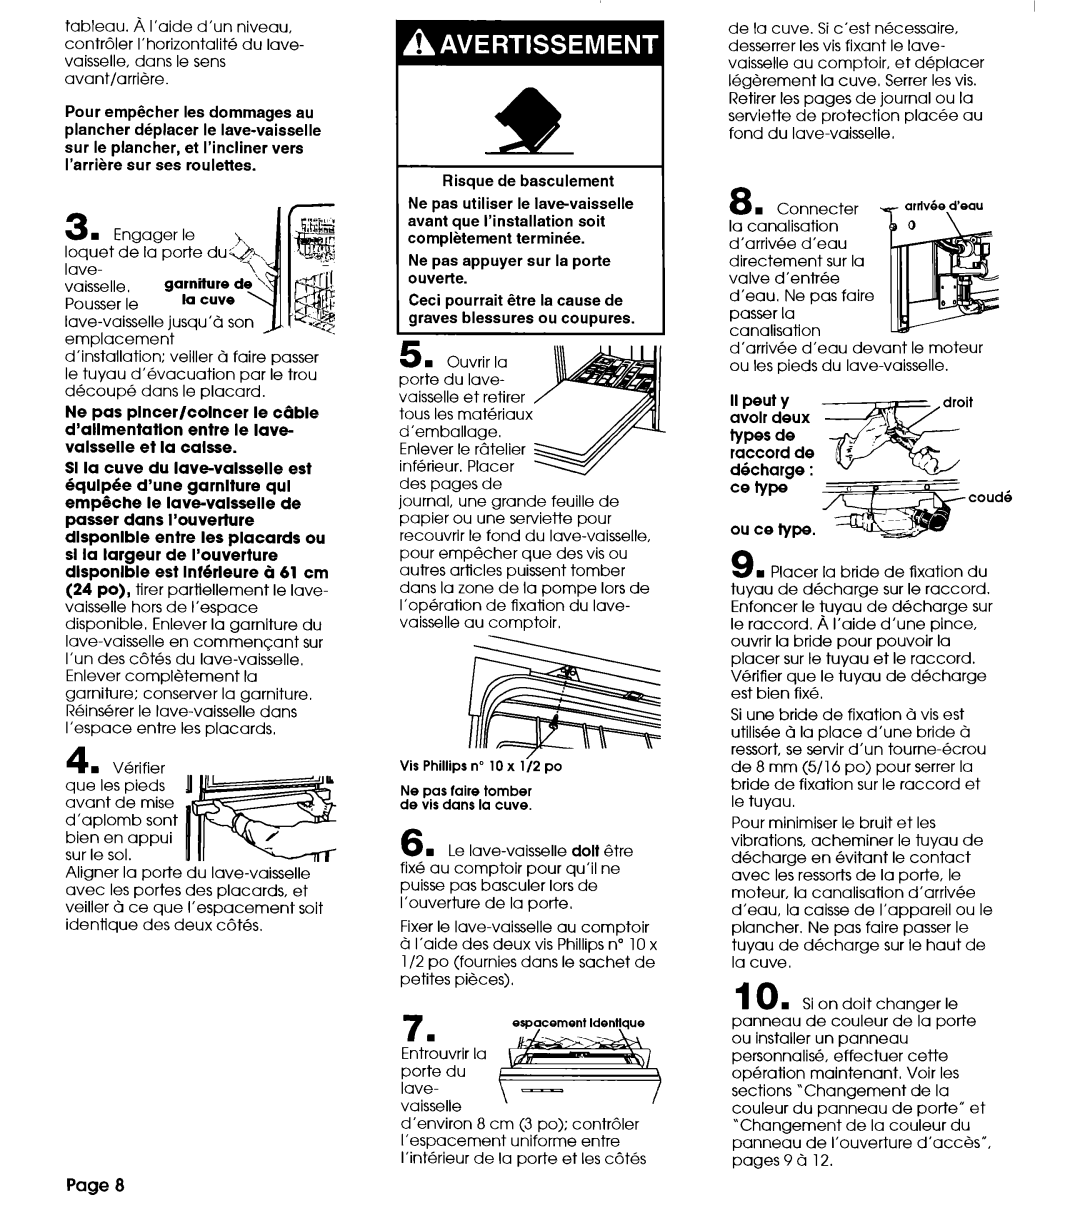 Whirlpool 801 installation instructions IIpeut y, Page 